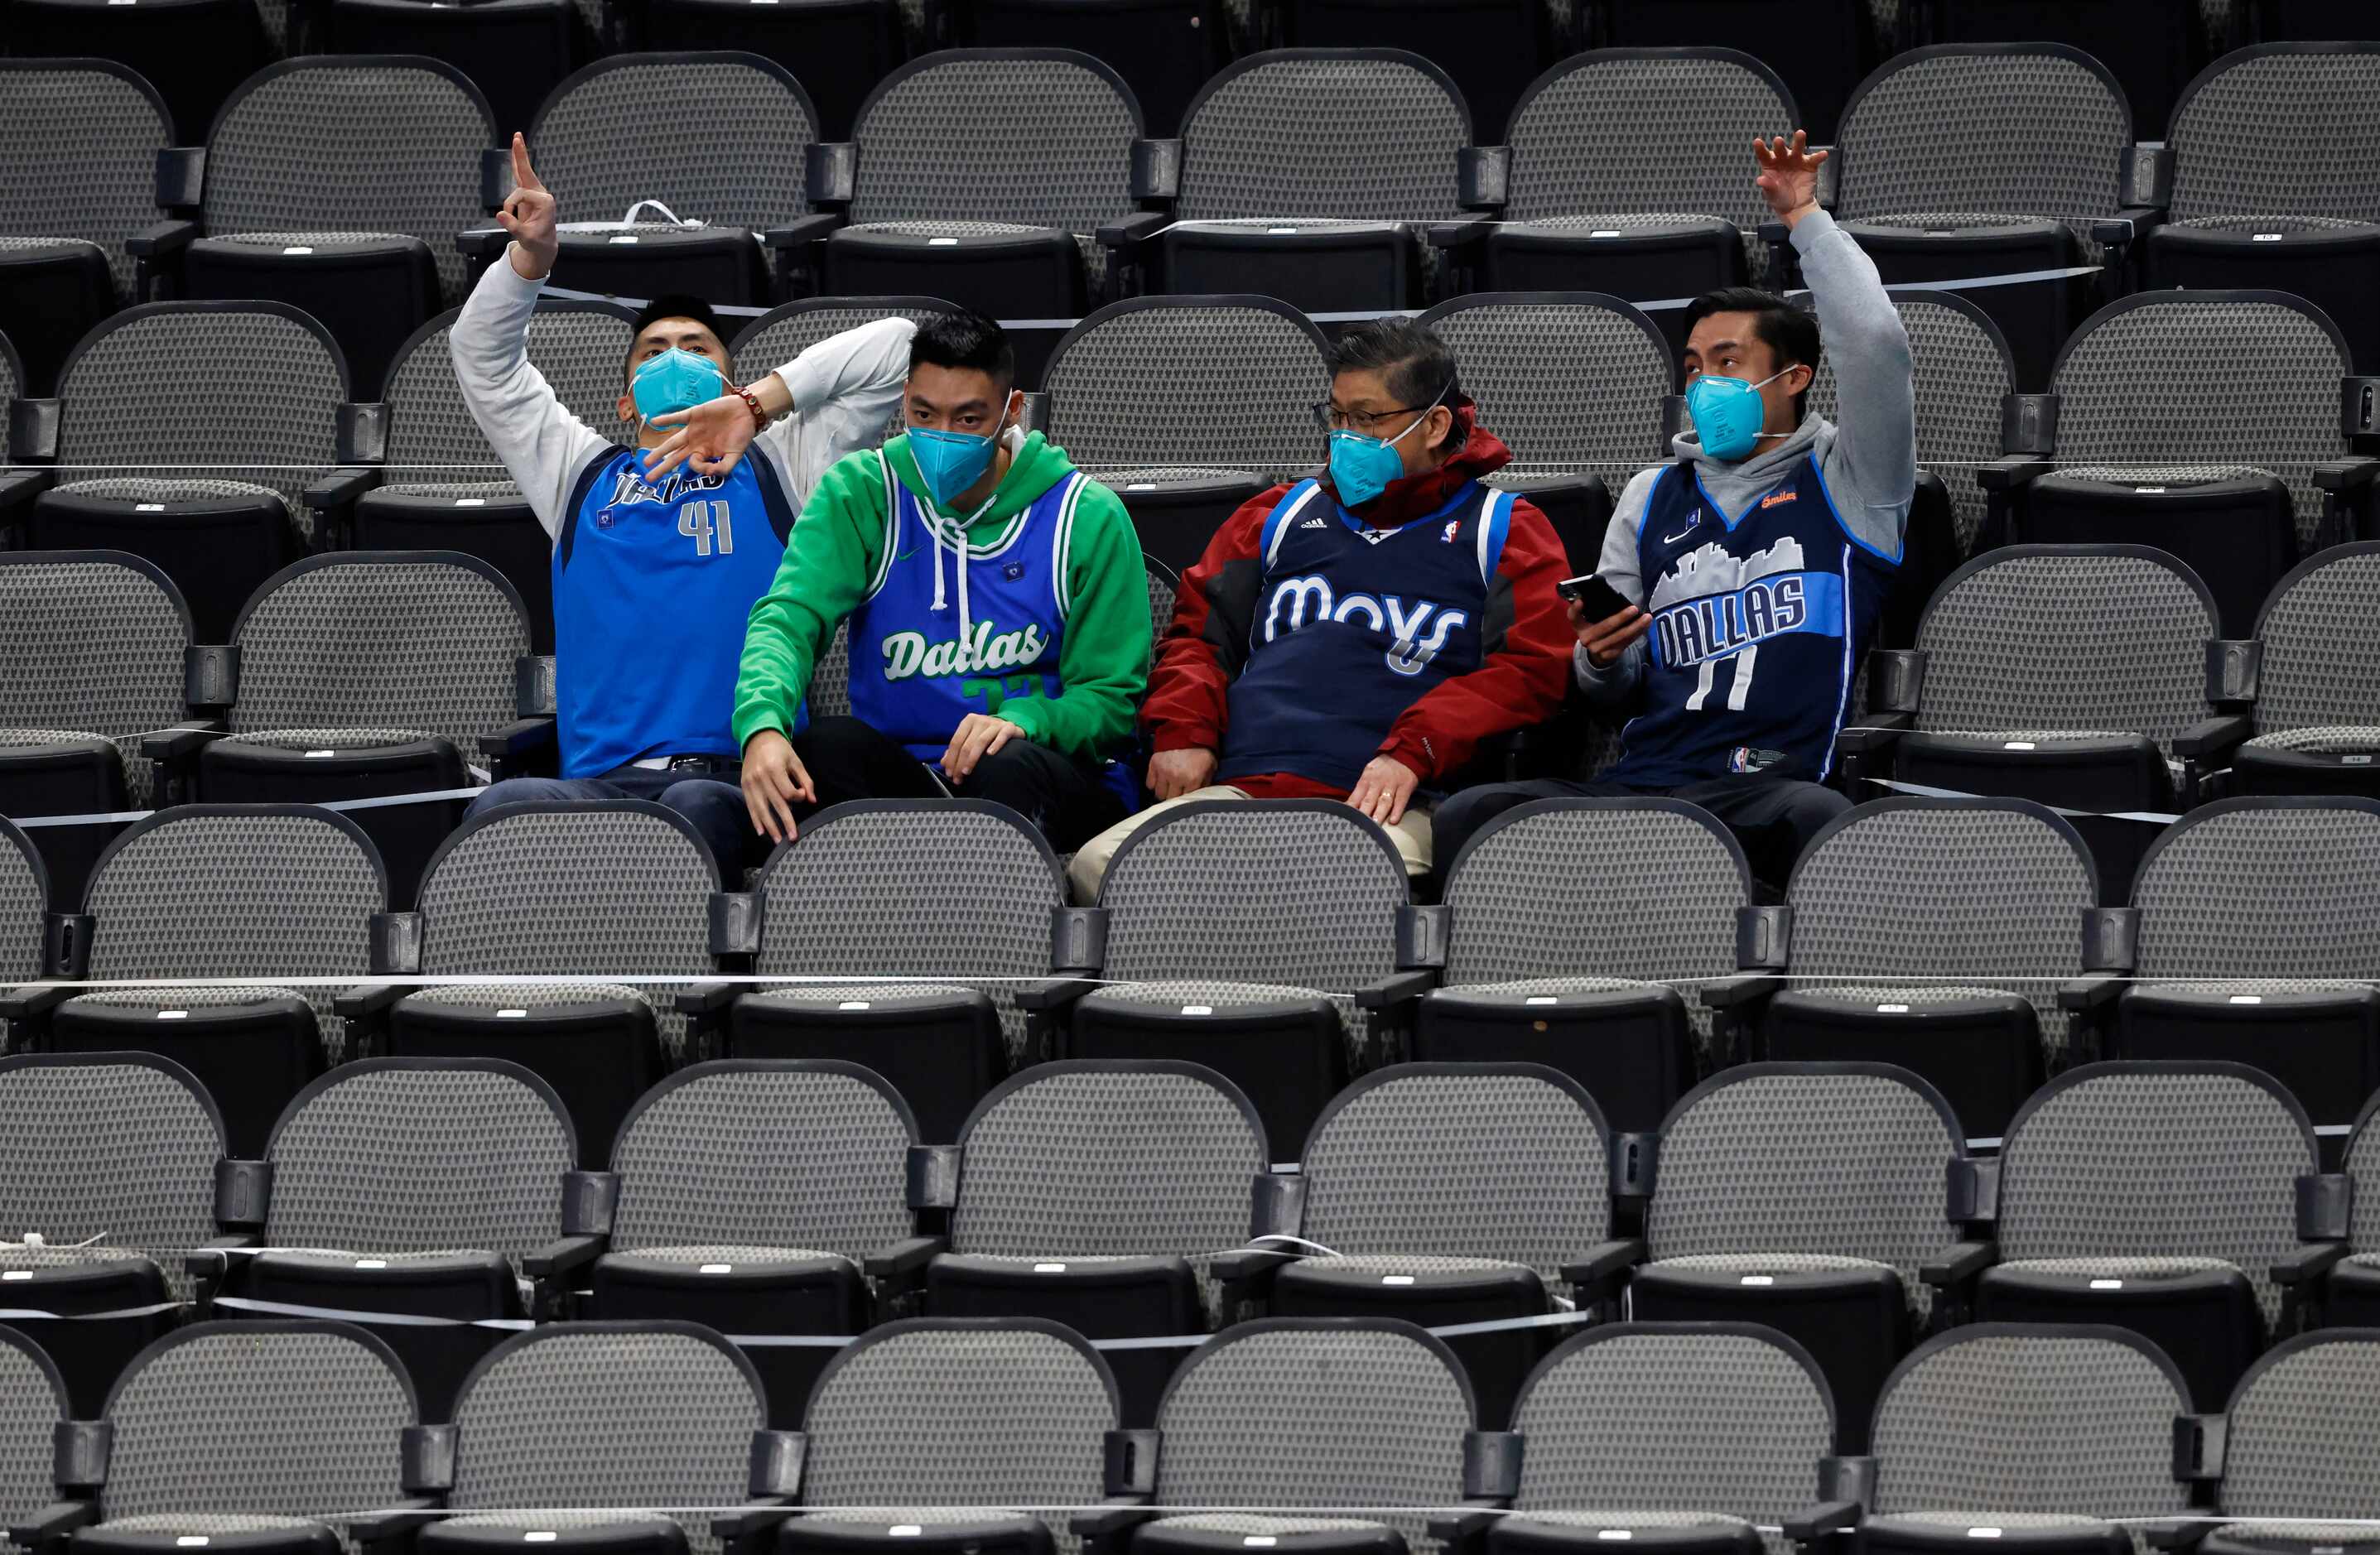 Dallas Mavericks fans celebrate a made basket as they play against the Minnesota...